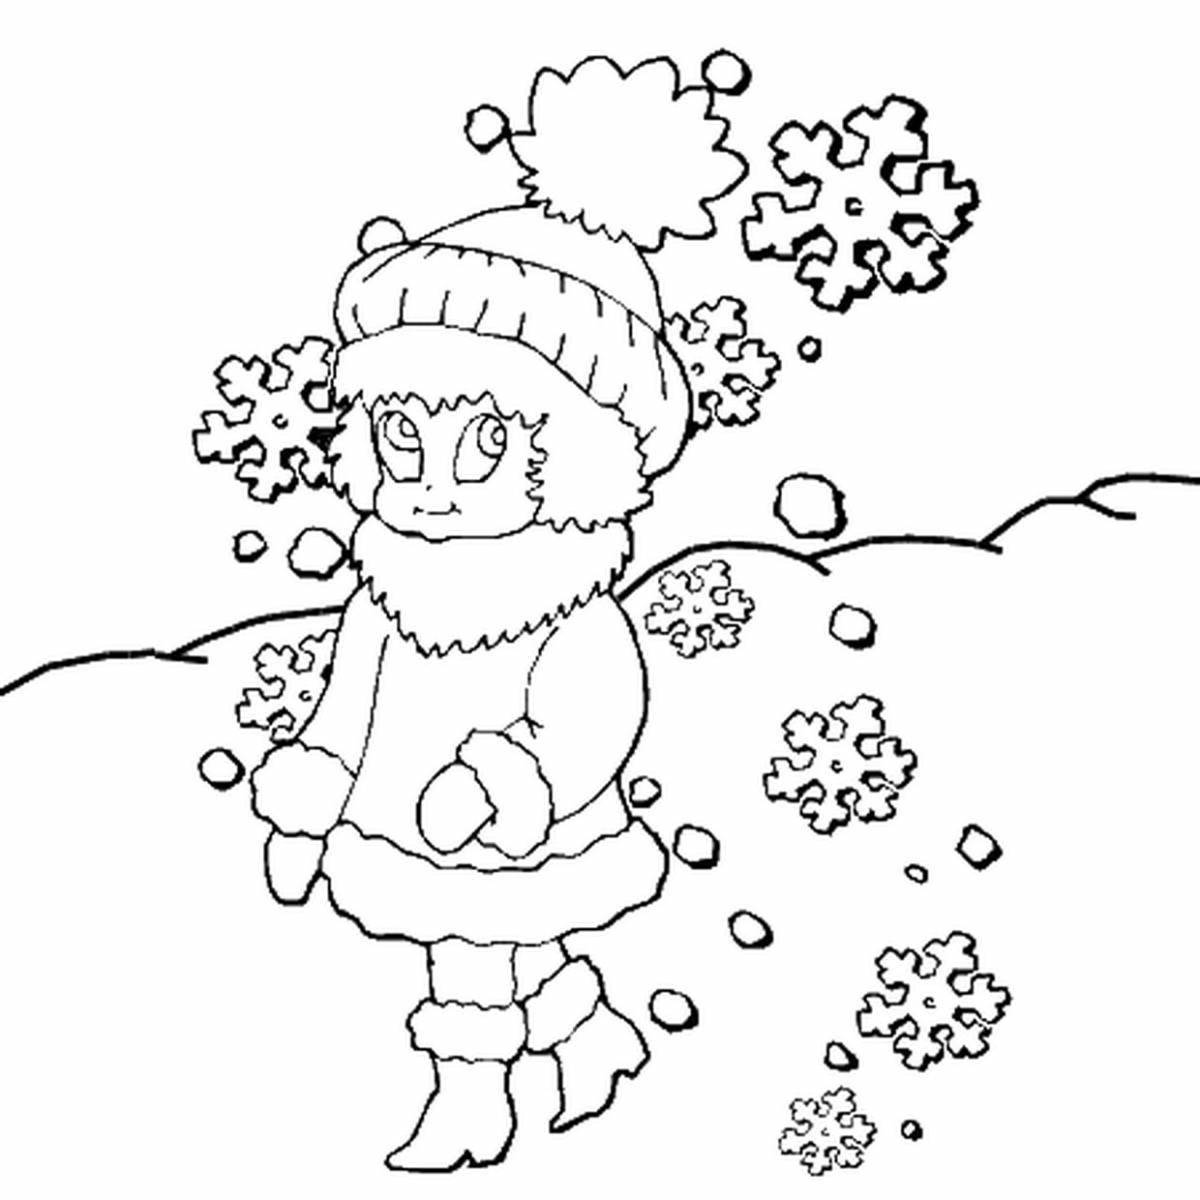 Glowing snow coloring book for kids